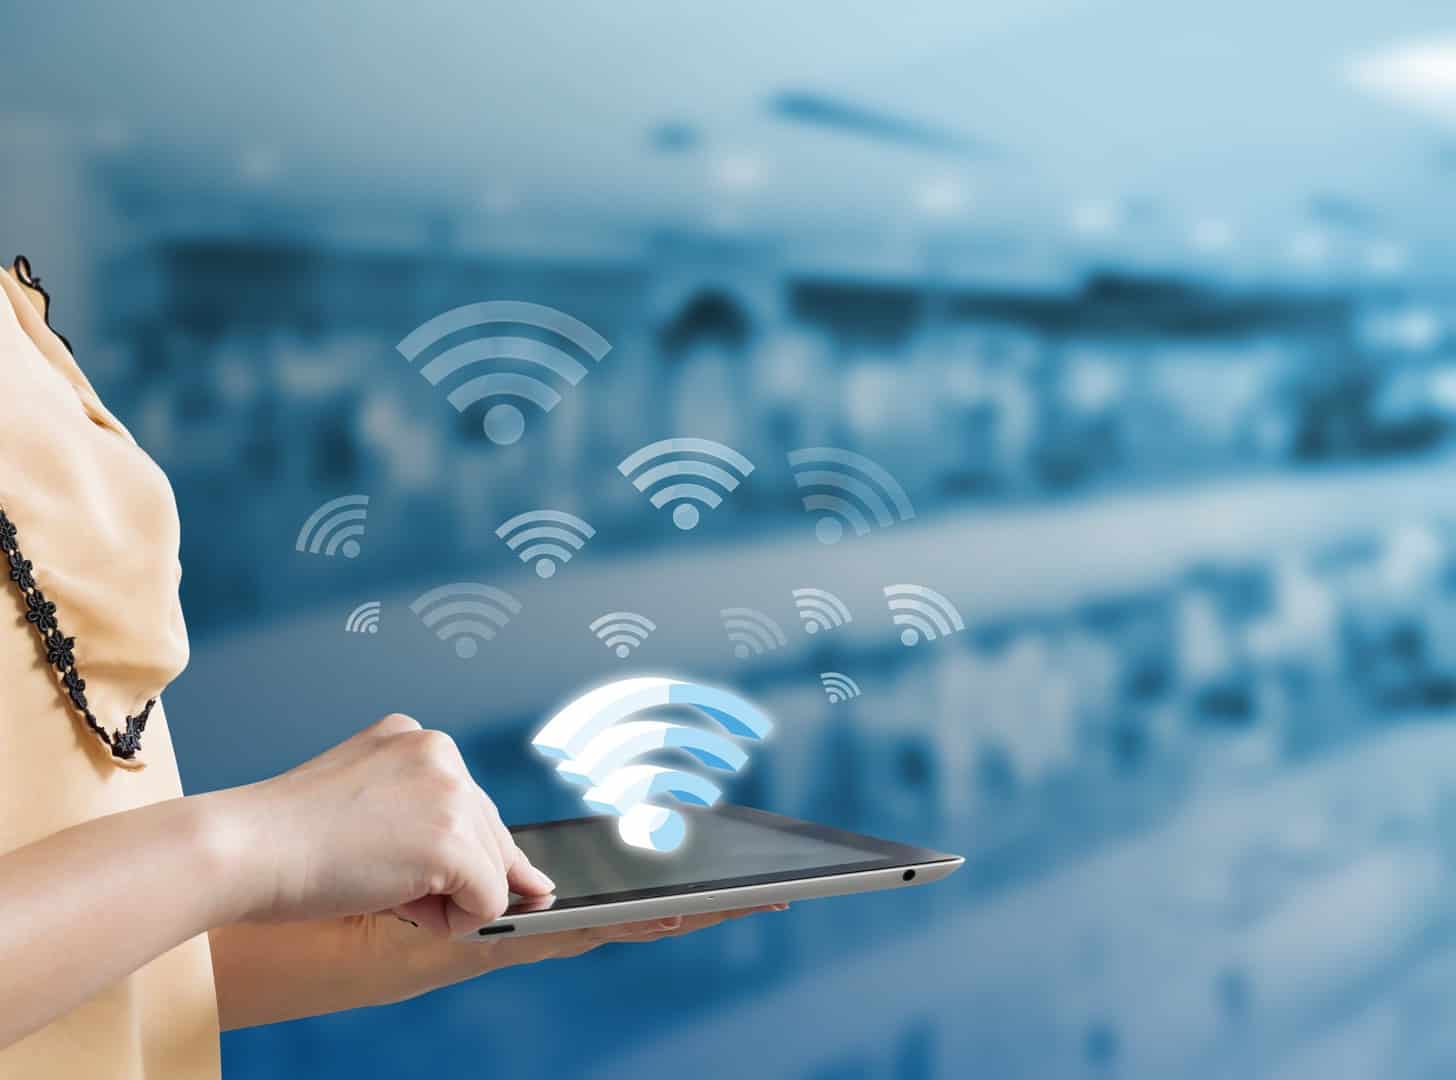 What You Need to Know About the Krack Wi-Fi Vulnerability